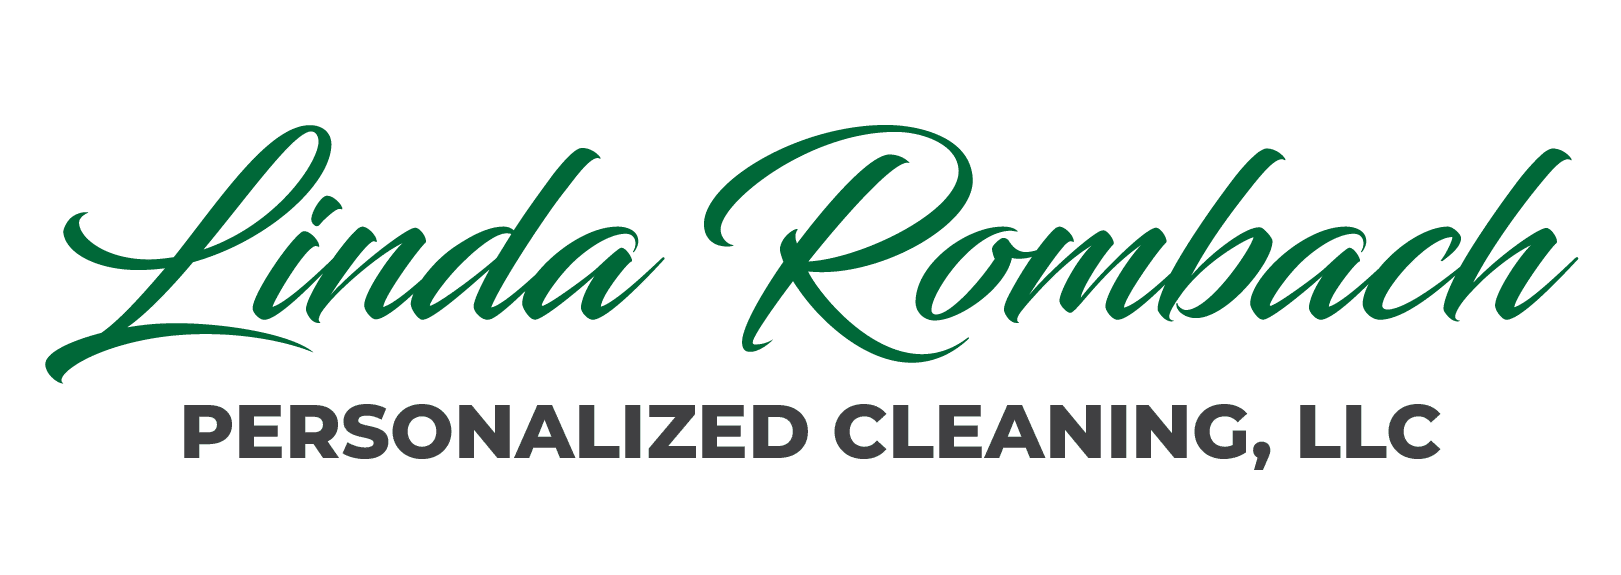 Linda Rombach Personalized Cleaning, LLC